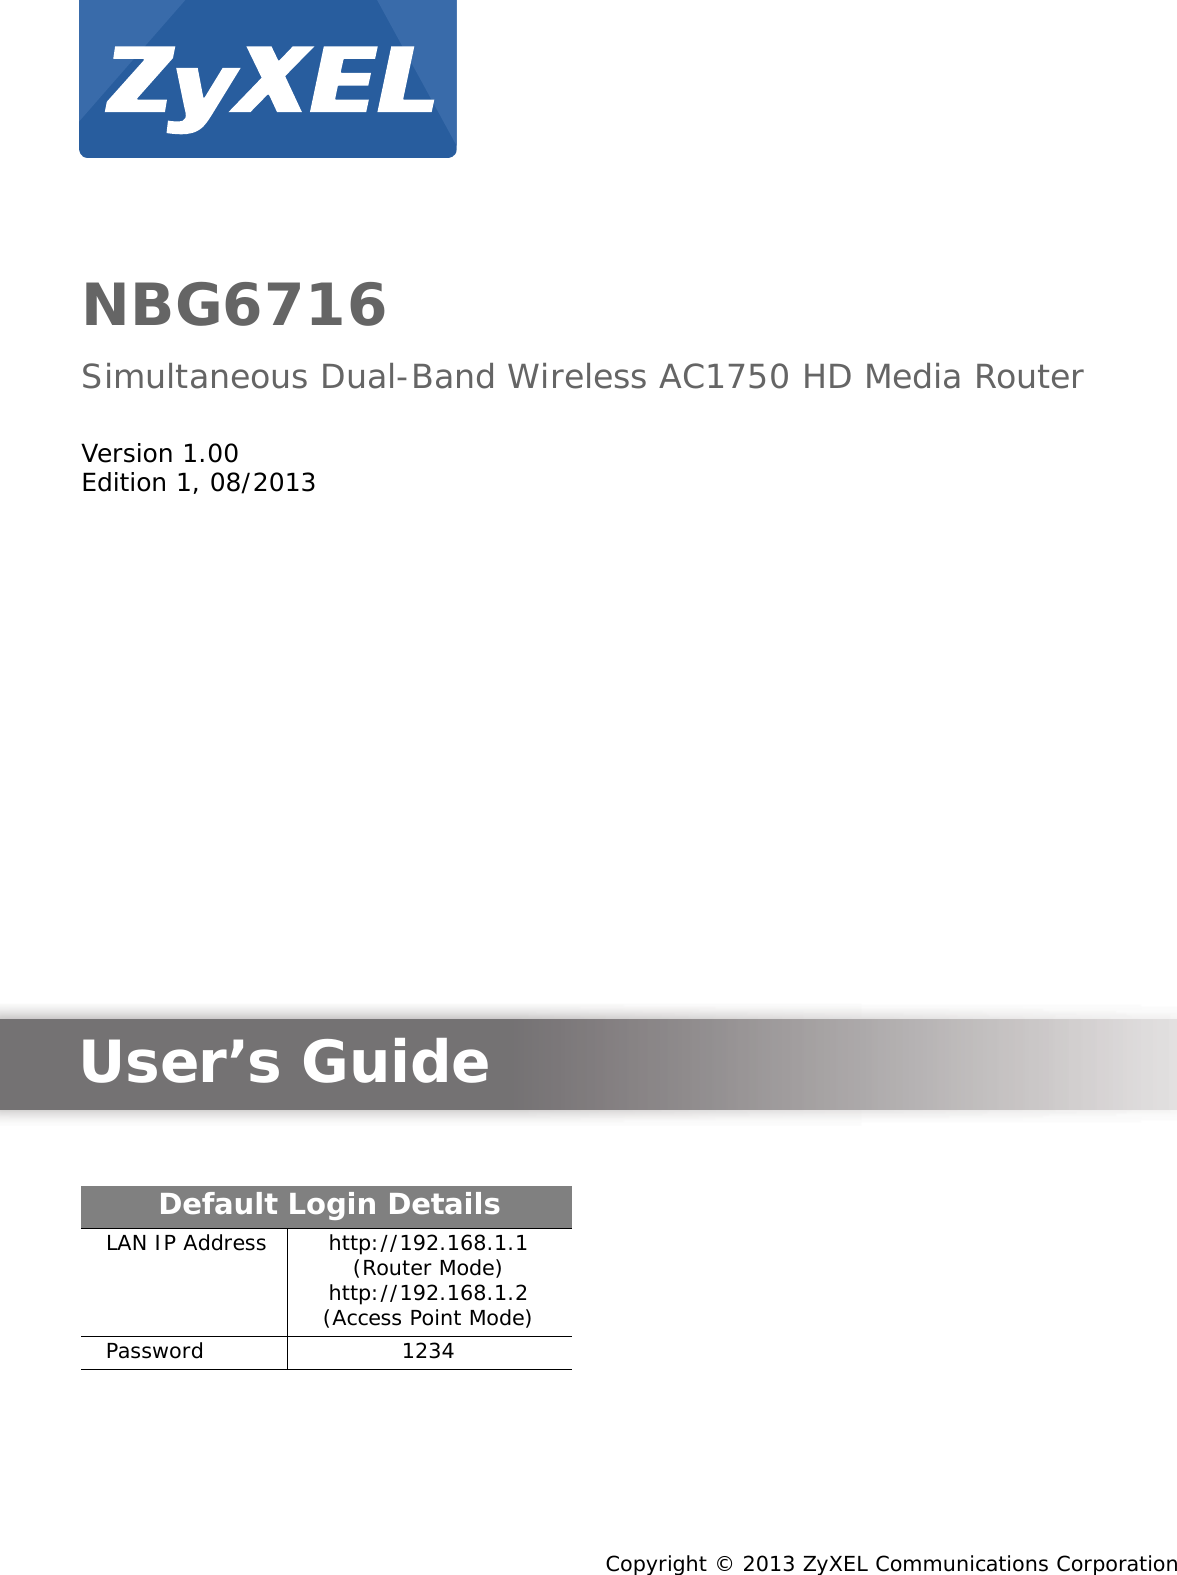 Quick Start Guidewww.zyxel.comNBG6716Simultaneous Dual-Band Wireless AC1750 HD Media RouterVersion 1.00Edition 1, 08/2013Copyright © 2013 ZyXEL Communications CorporationUser’s GuideDefault Login DetailsLAN IP Address http://192.168.1.1 (Router Mode)http://192.168.1.2 (Access Point Mode)Password 1234